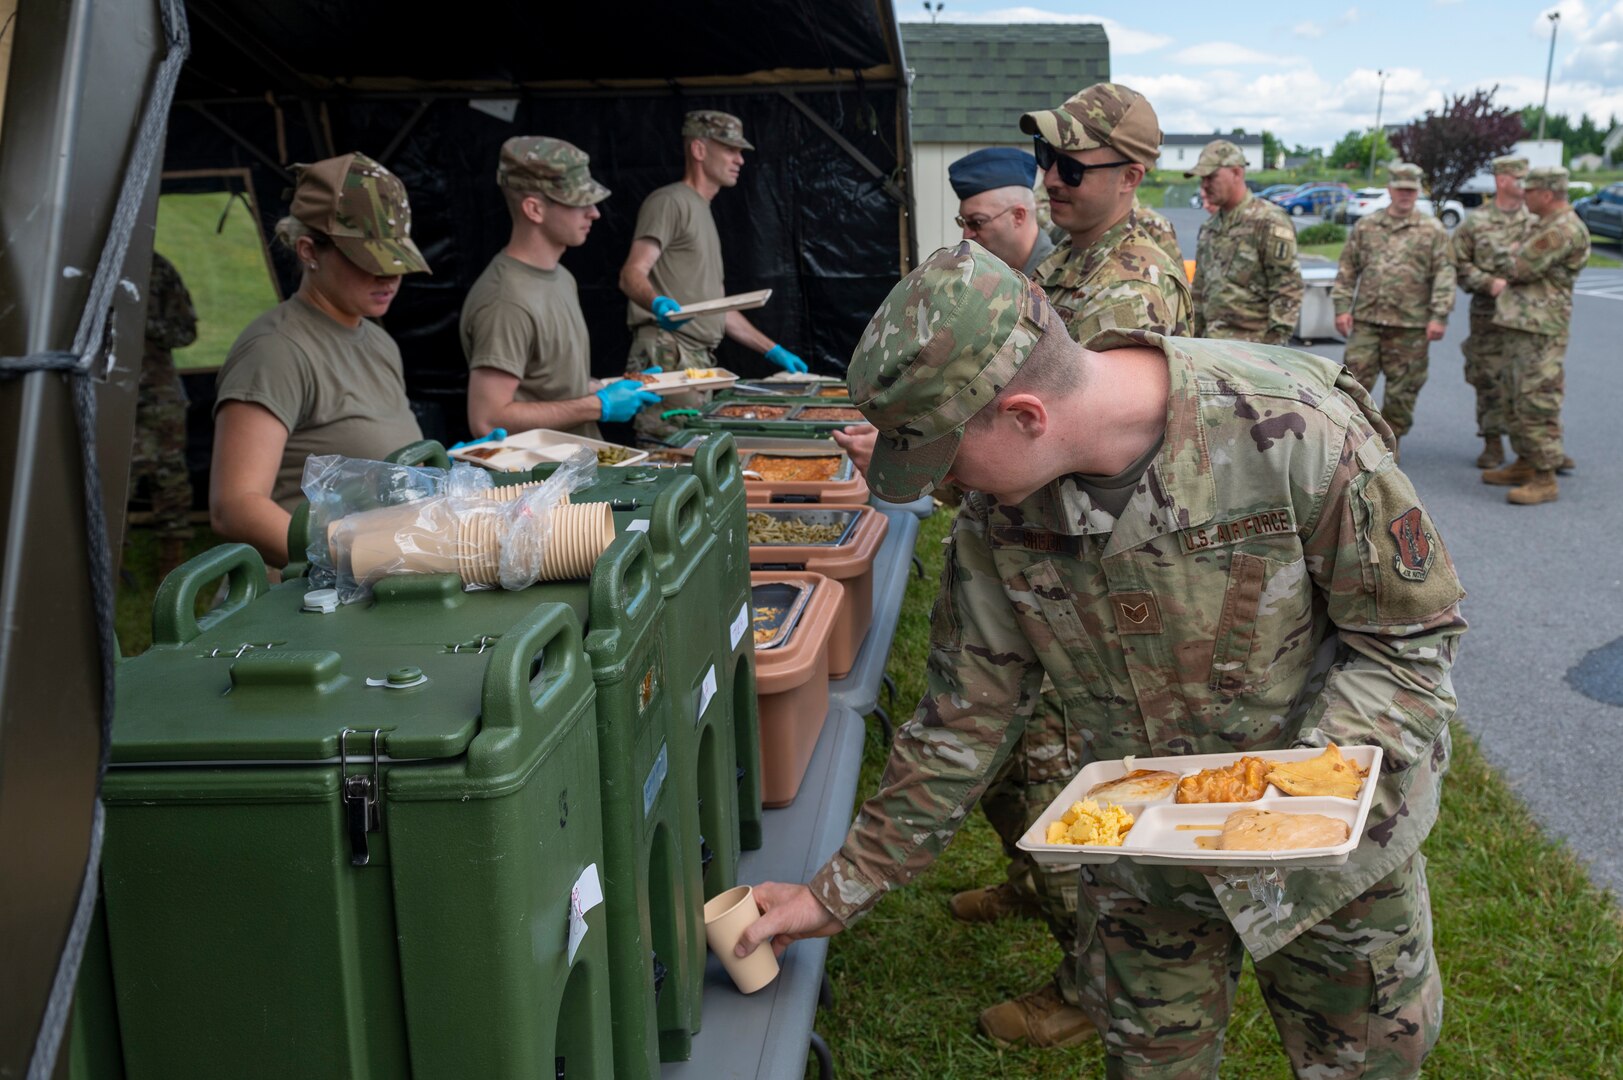 U.S. Air Force Staff Sgt. Joshua Shuck, fuel system specialist with the 167th Maintenance Group, gets his lunch at a single pallet expeditionary kitchen (SPEK) during June’s regularly scheduled drill training event at the 167th Airlift Wing, Martinsburg, West Virginia, June 9, 2022. A SPEK designed to be used in a deployed environment but was set up and used for training purposes during a unit training assembly.